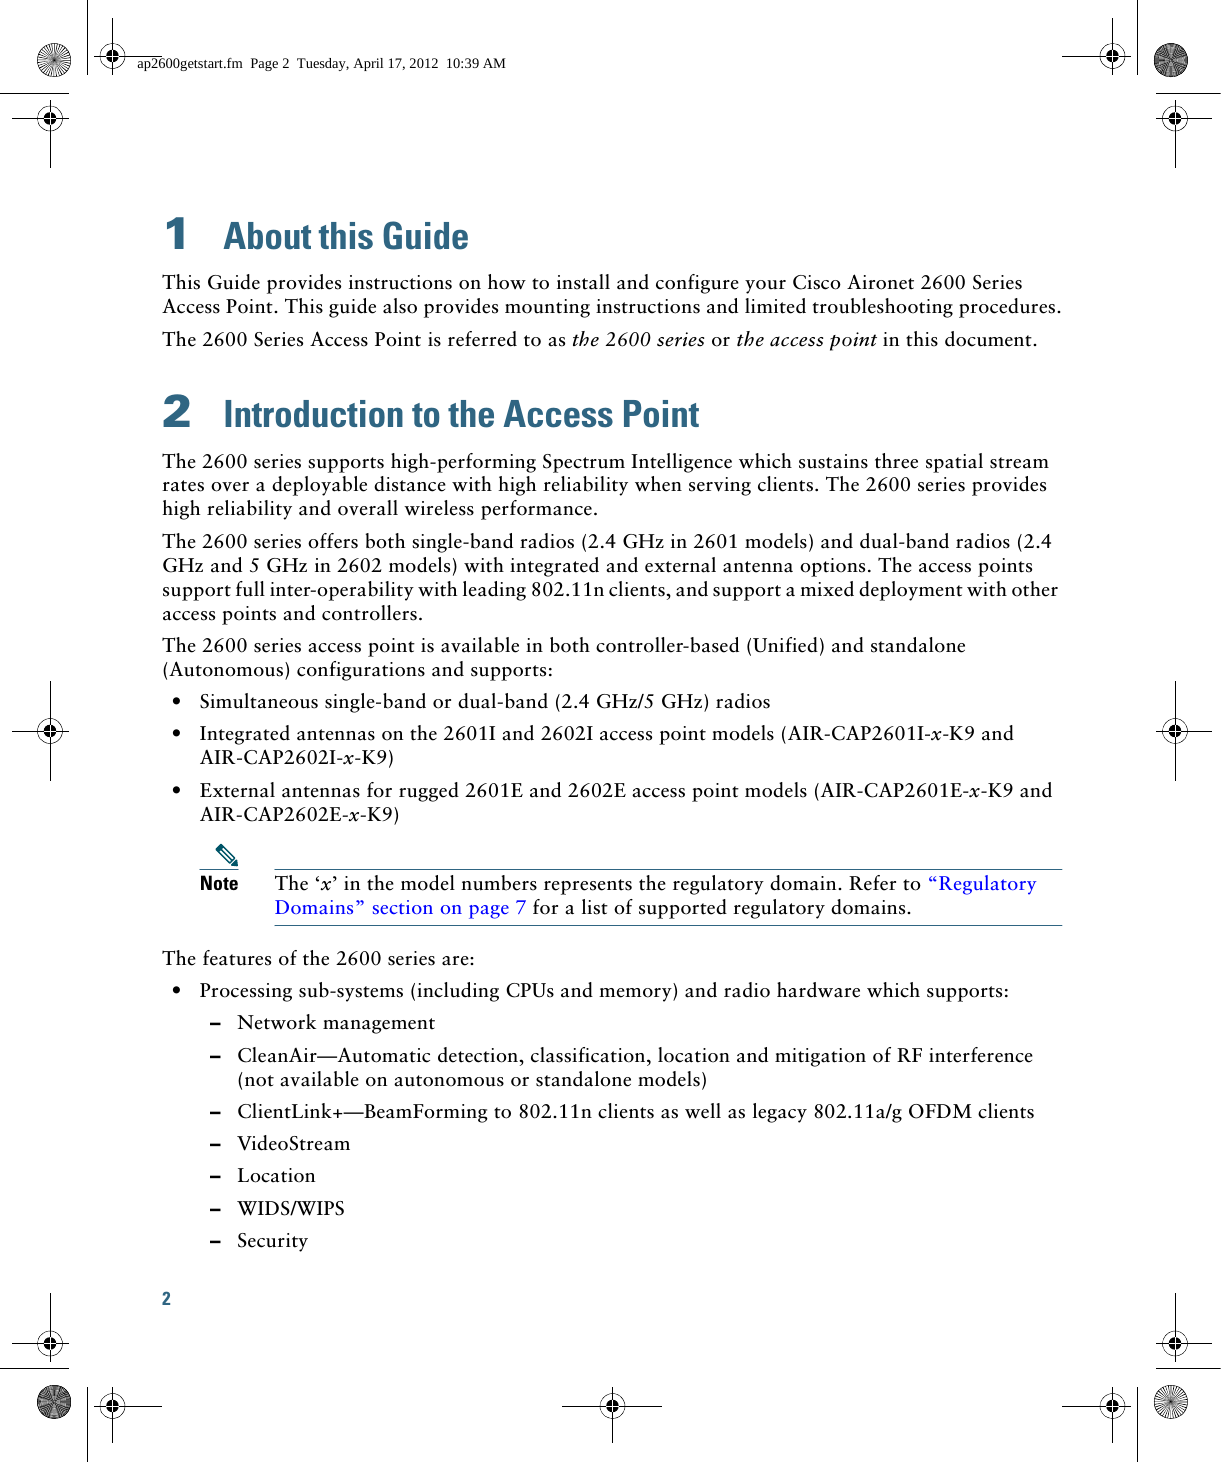 2 1  About this GuideThis Guide provides instructions on how to install and configure your Cisco Aironet 2600 Series Access Point. This guide also provides mounting instructions and limited troubleshooting procedures.The 2600 Series Access Point is referred to as the 2600 series or the access point in this document.2  Introduction to the Access PointThe 2600 series supports high-performing Spectrum Intelligence which sustains three spatial stream rates over a deployable distance with high reliability when serving clients. The 2600 series provides high reliability and overall wireless performance.The 2600 series offers both single-band radios (2.4 GHz in 2601 models) and dual-band radios (2.4 GHz and 5 GHz in 2602 models) with integrated and external antenna options. The access points support full inter-operability with leading 802.11n clients, and support a mixed deployment with other access points and controllers.The 2600 series access point is available in both controller-based (Unified) and standalone (Autonomous) configurations and supports:  • Simultaneous single-band or dual-band (2.4 GHz/5 GHz) radios  • Integrated antennas on the 2601I and 2602I access point models (AIR-CAP2601I-x-K9 and AIR-CAP2602I-x-K9)  • External antennas for rugged 2601E and 2602E access point models (AIR-CAP2601E-x-K9 and AIR-CAP2602E-x-K9)Note The ‘x’ in the model numbers represents the regulatory domain. Refer to “Regulatory Domains” section on page 7 for a list of supported regulatory domains.The features of the 2600 series are:  • Processing sub-systems (including CPUs and memory) and radio hardware which supports:  –Network management  –CleanAir—Automatic detection, classification, location and mitigation of RF interference (not available on autonomous or standalone models)  –ClientLink+—BeamForming to 802.11n clients as well as legacy 802.11a/g OFDM clients   –VideoStream  –Location  –WIDS/WIPS  –Securityap2600getstart.fm  Page 2  Tuesday, April 17, 2012  10:39 AM